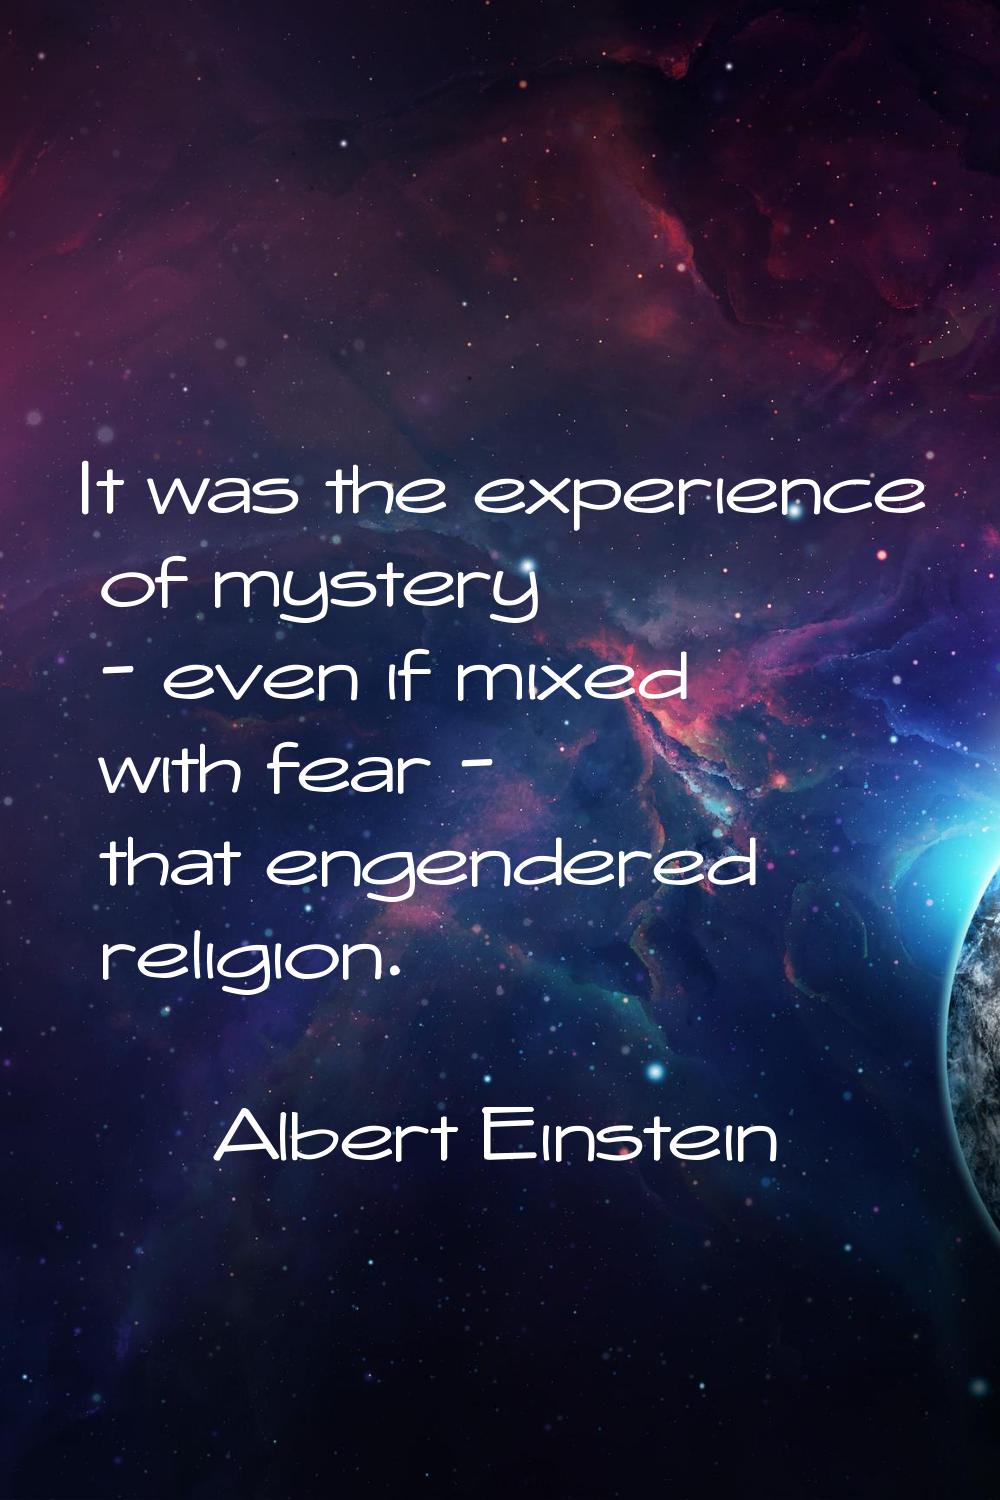 It was the experience of mystery - even if mixed with fear - that engendered religion.